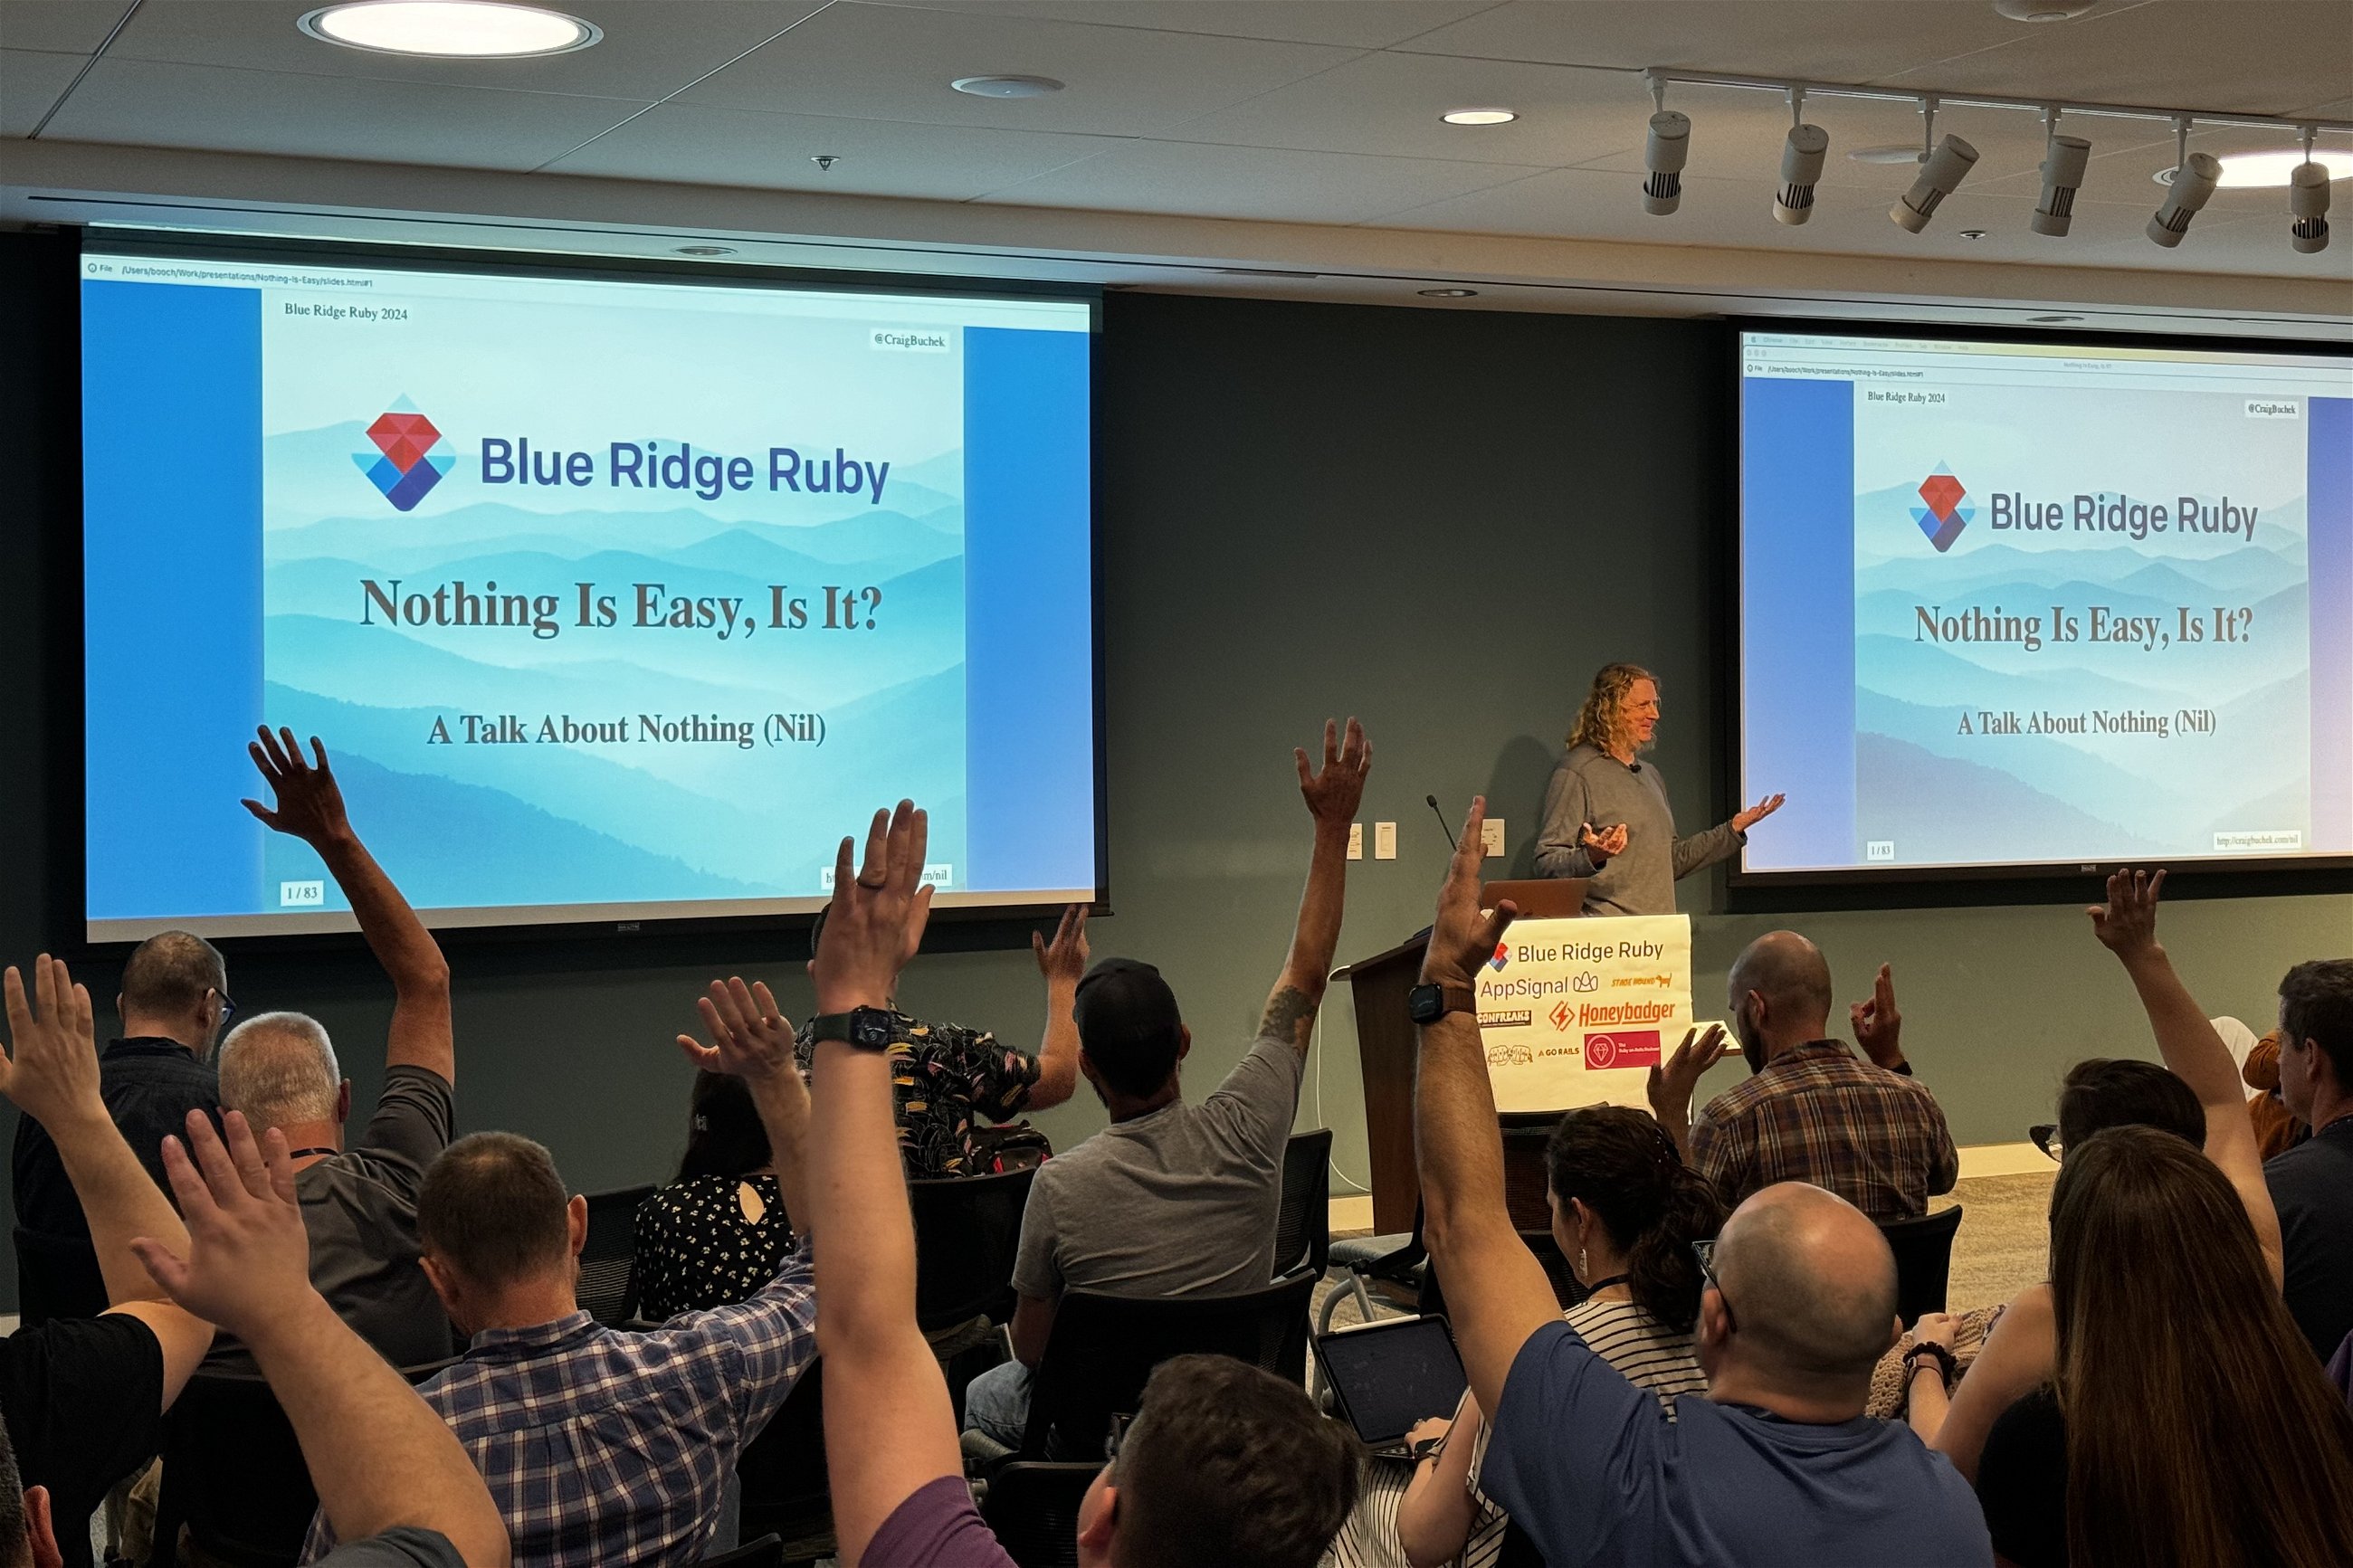 Craig Buchek engaging with the audience during a presentation titled "Nothing Is Easy, Is It? A Talk About Nothing (Nil)" at Blue Ridge Ruby conference, with several attendees raising their hands in response.